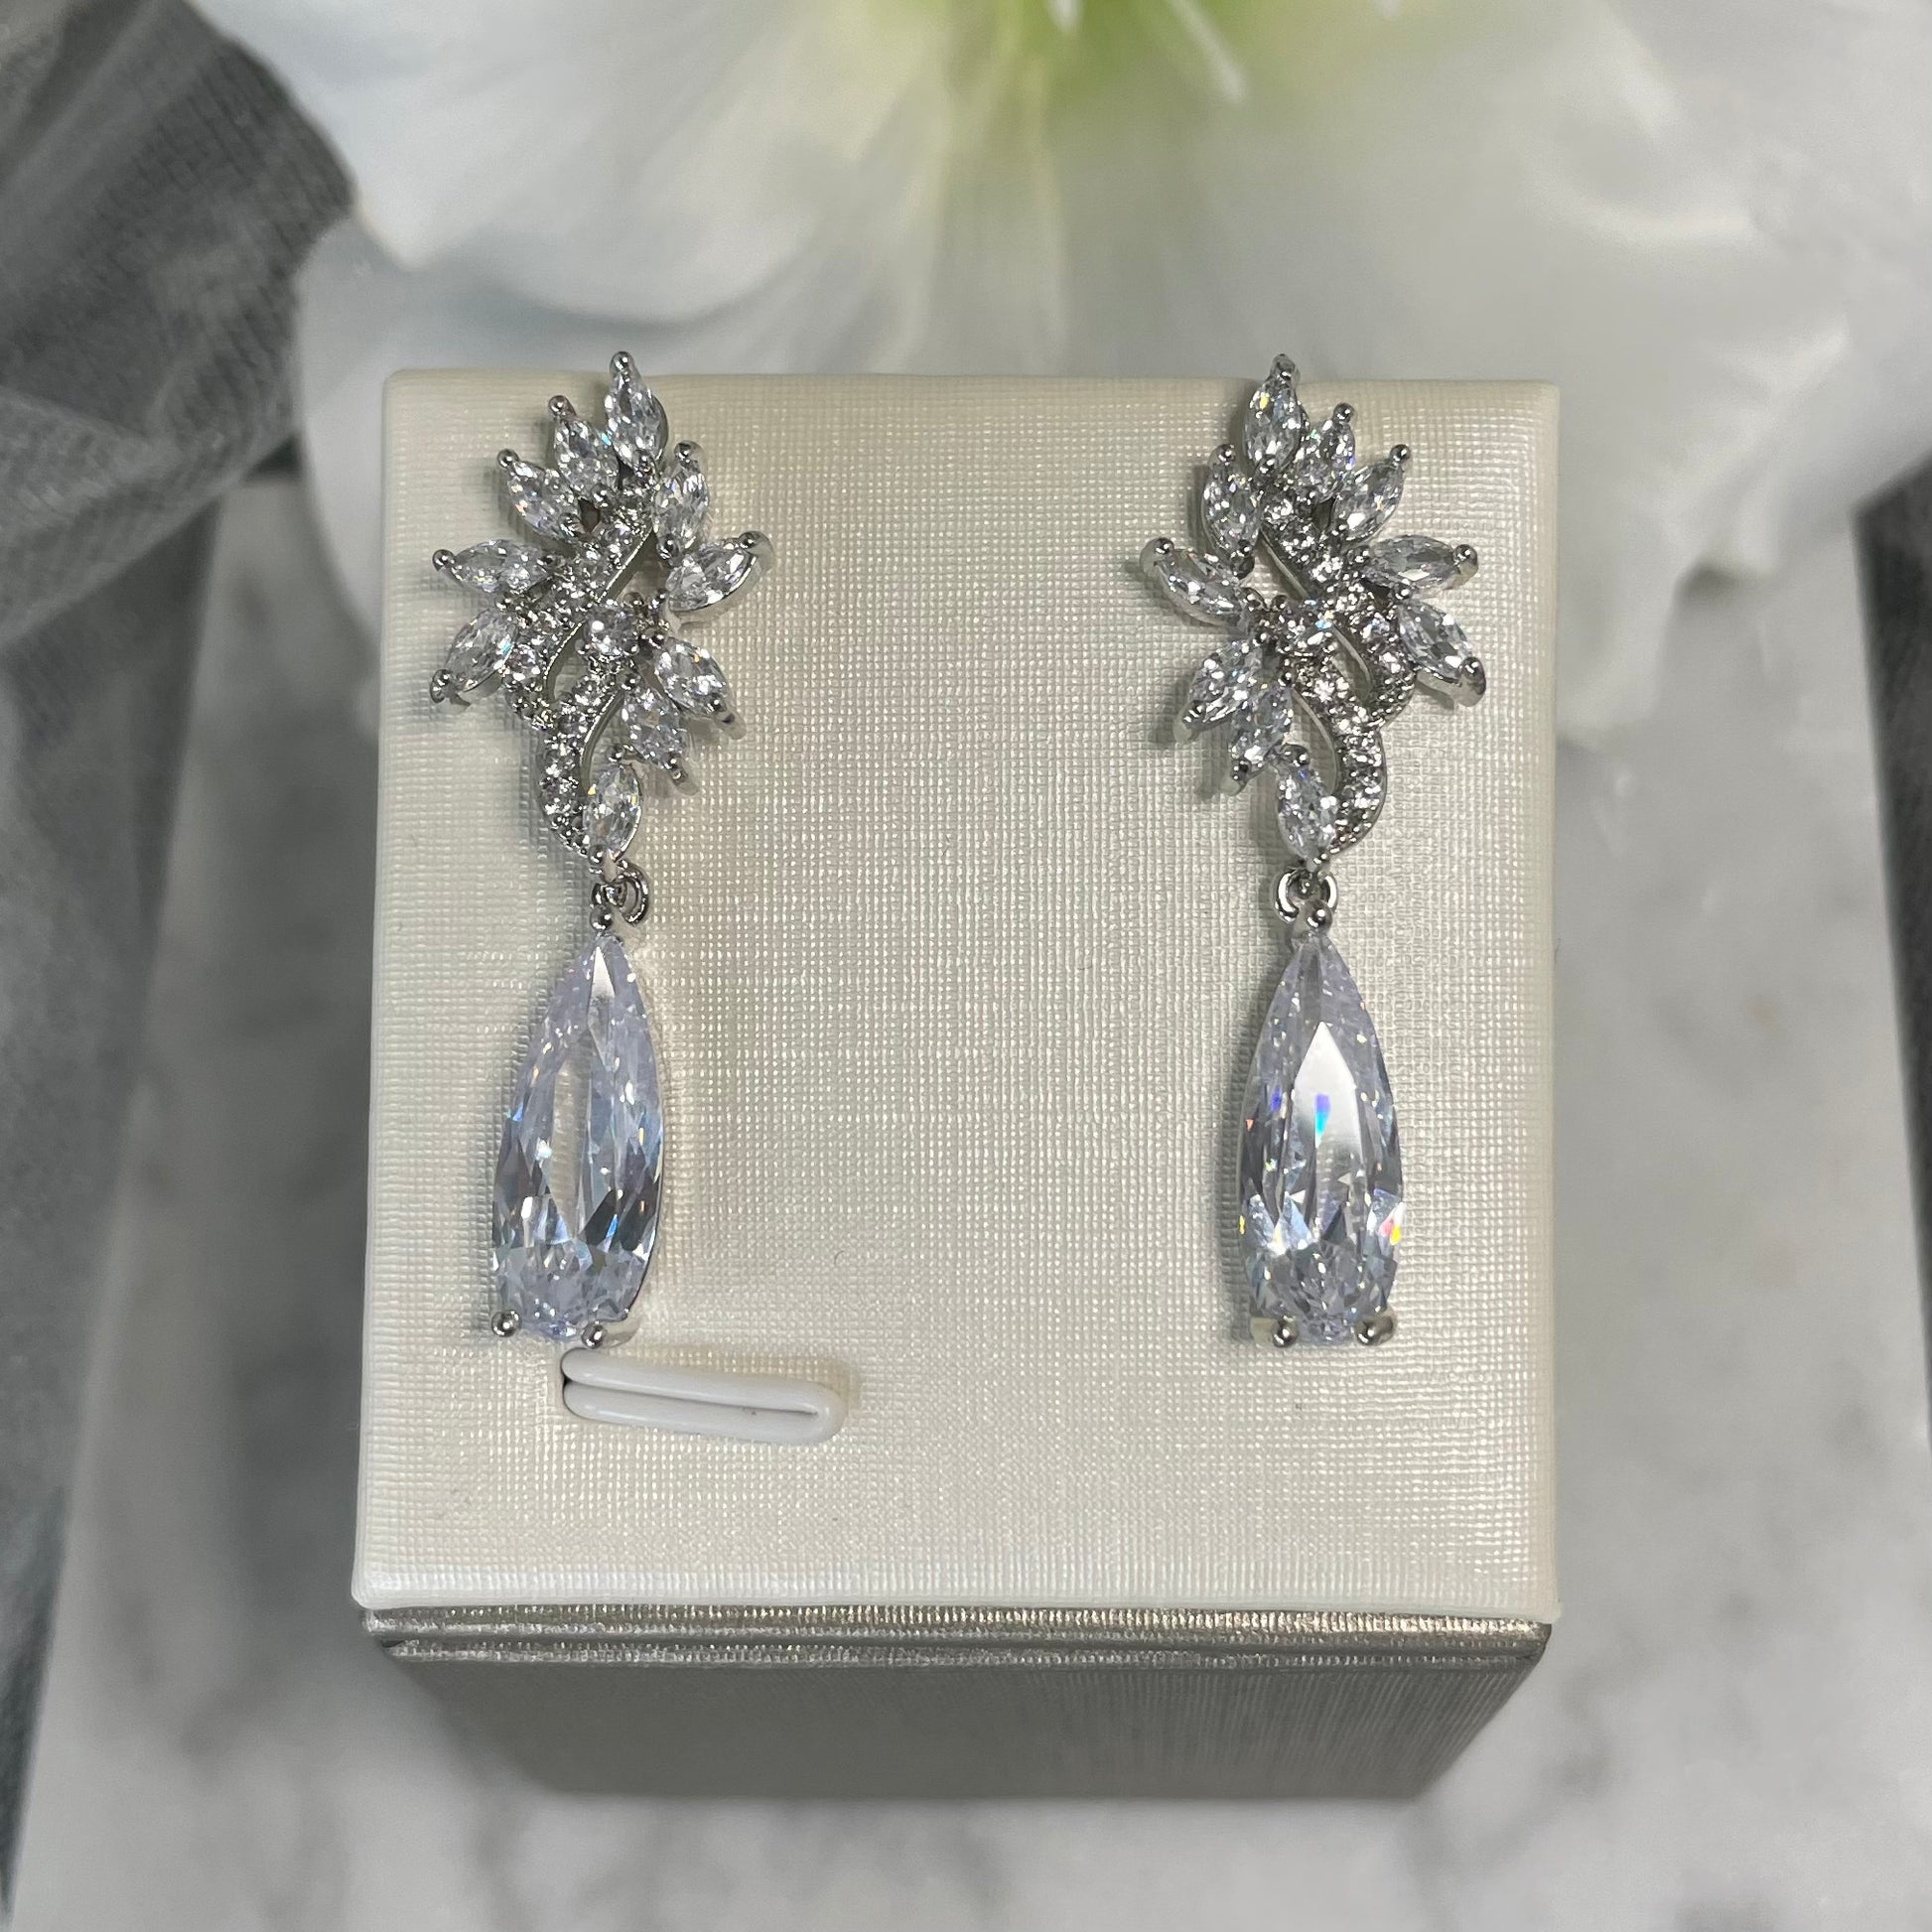 Kirsty crystal earrings featuring a wavy leaf design and clusters of sparkling cubic zirconia, finished with a delicate teardrop crystal, perfect for adding glamour to any event.